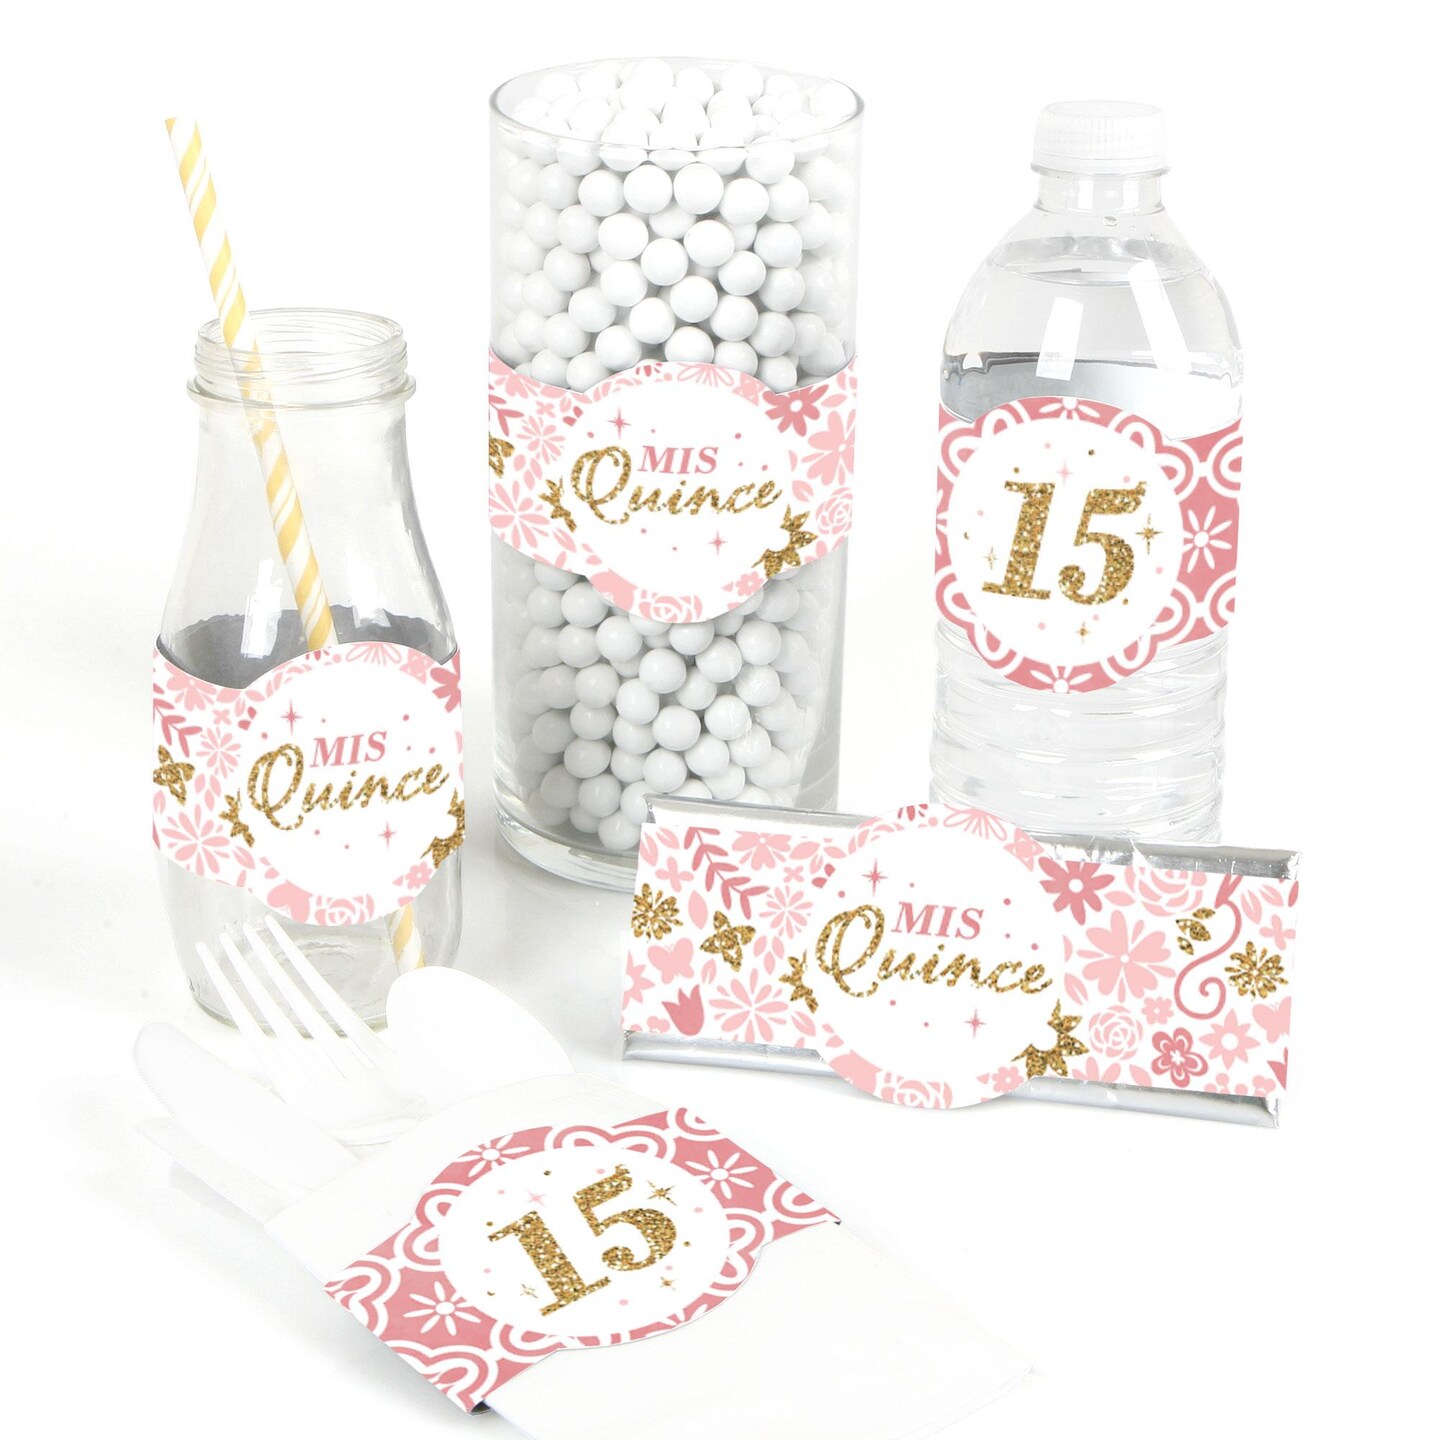 Big Dot of Happiness Mis Quince Anos - DIY Party Supplies - Quinceanera Sweet 15 Birthday Party DIY Wrapper Favors and Decorations - Set of 15